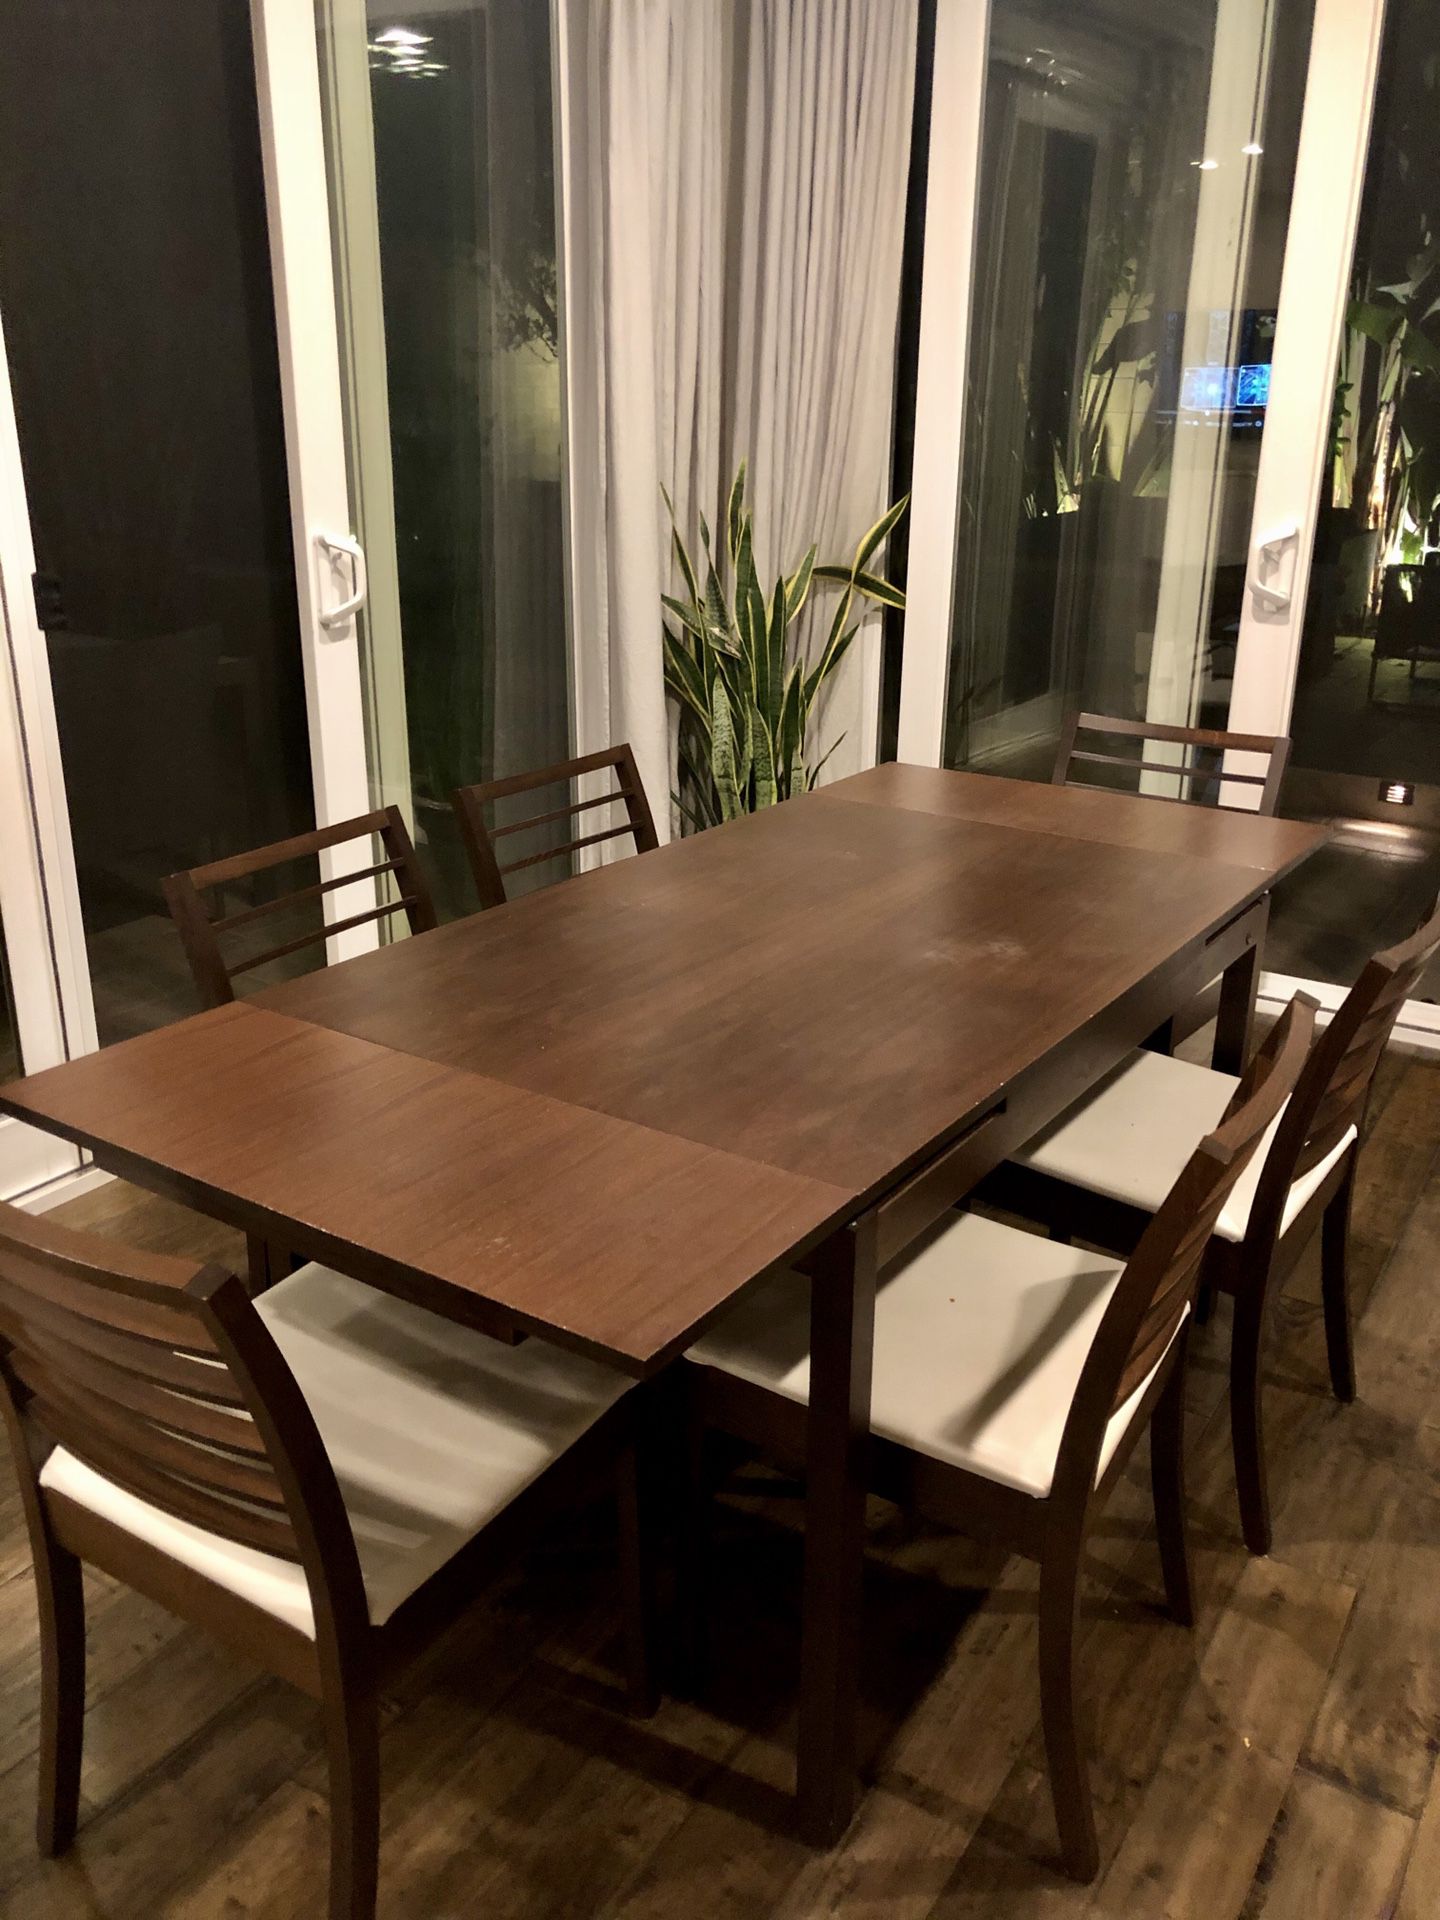 Calligaris (modern Italian brand) dining table and 6 chairs (extendable to 24 “)